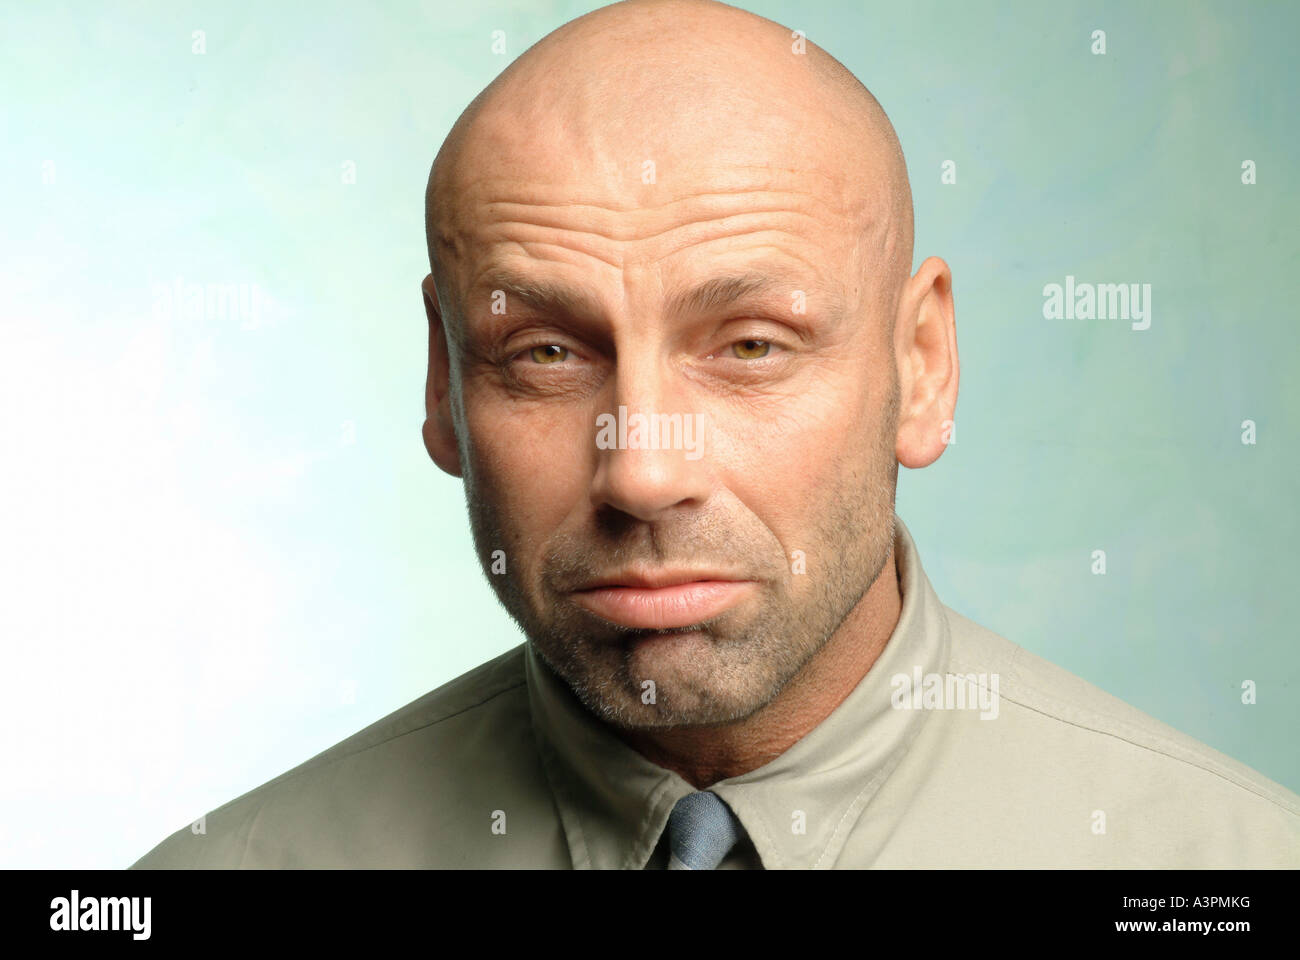 Man with a sleepy look on his face Stock Photo - Alamy